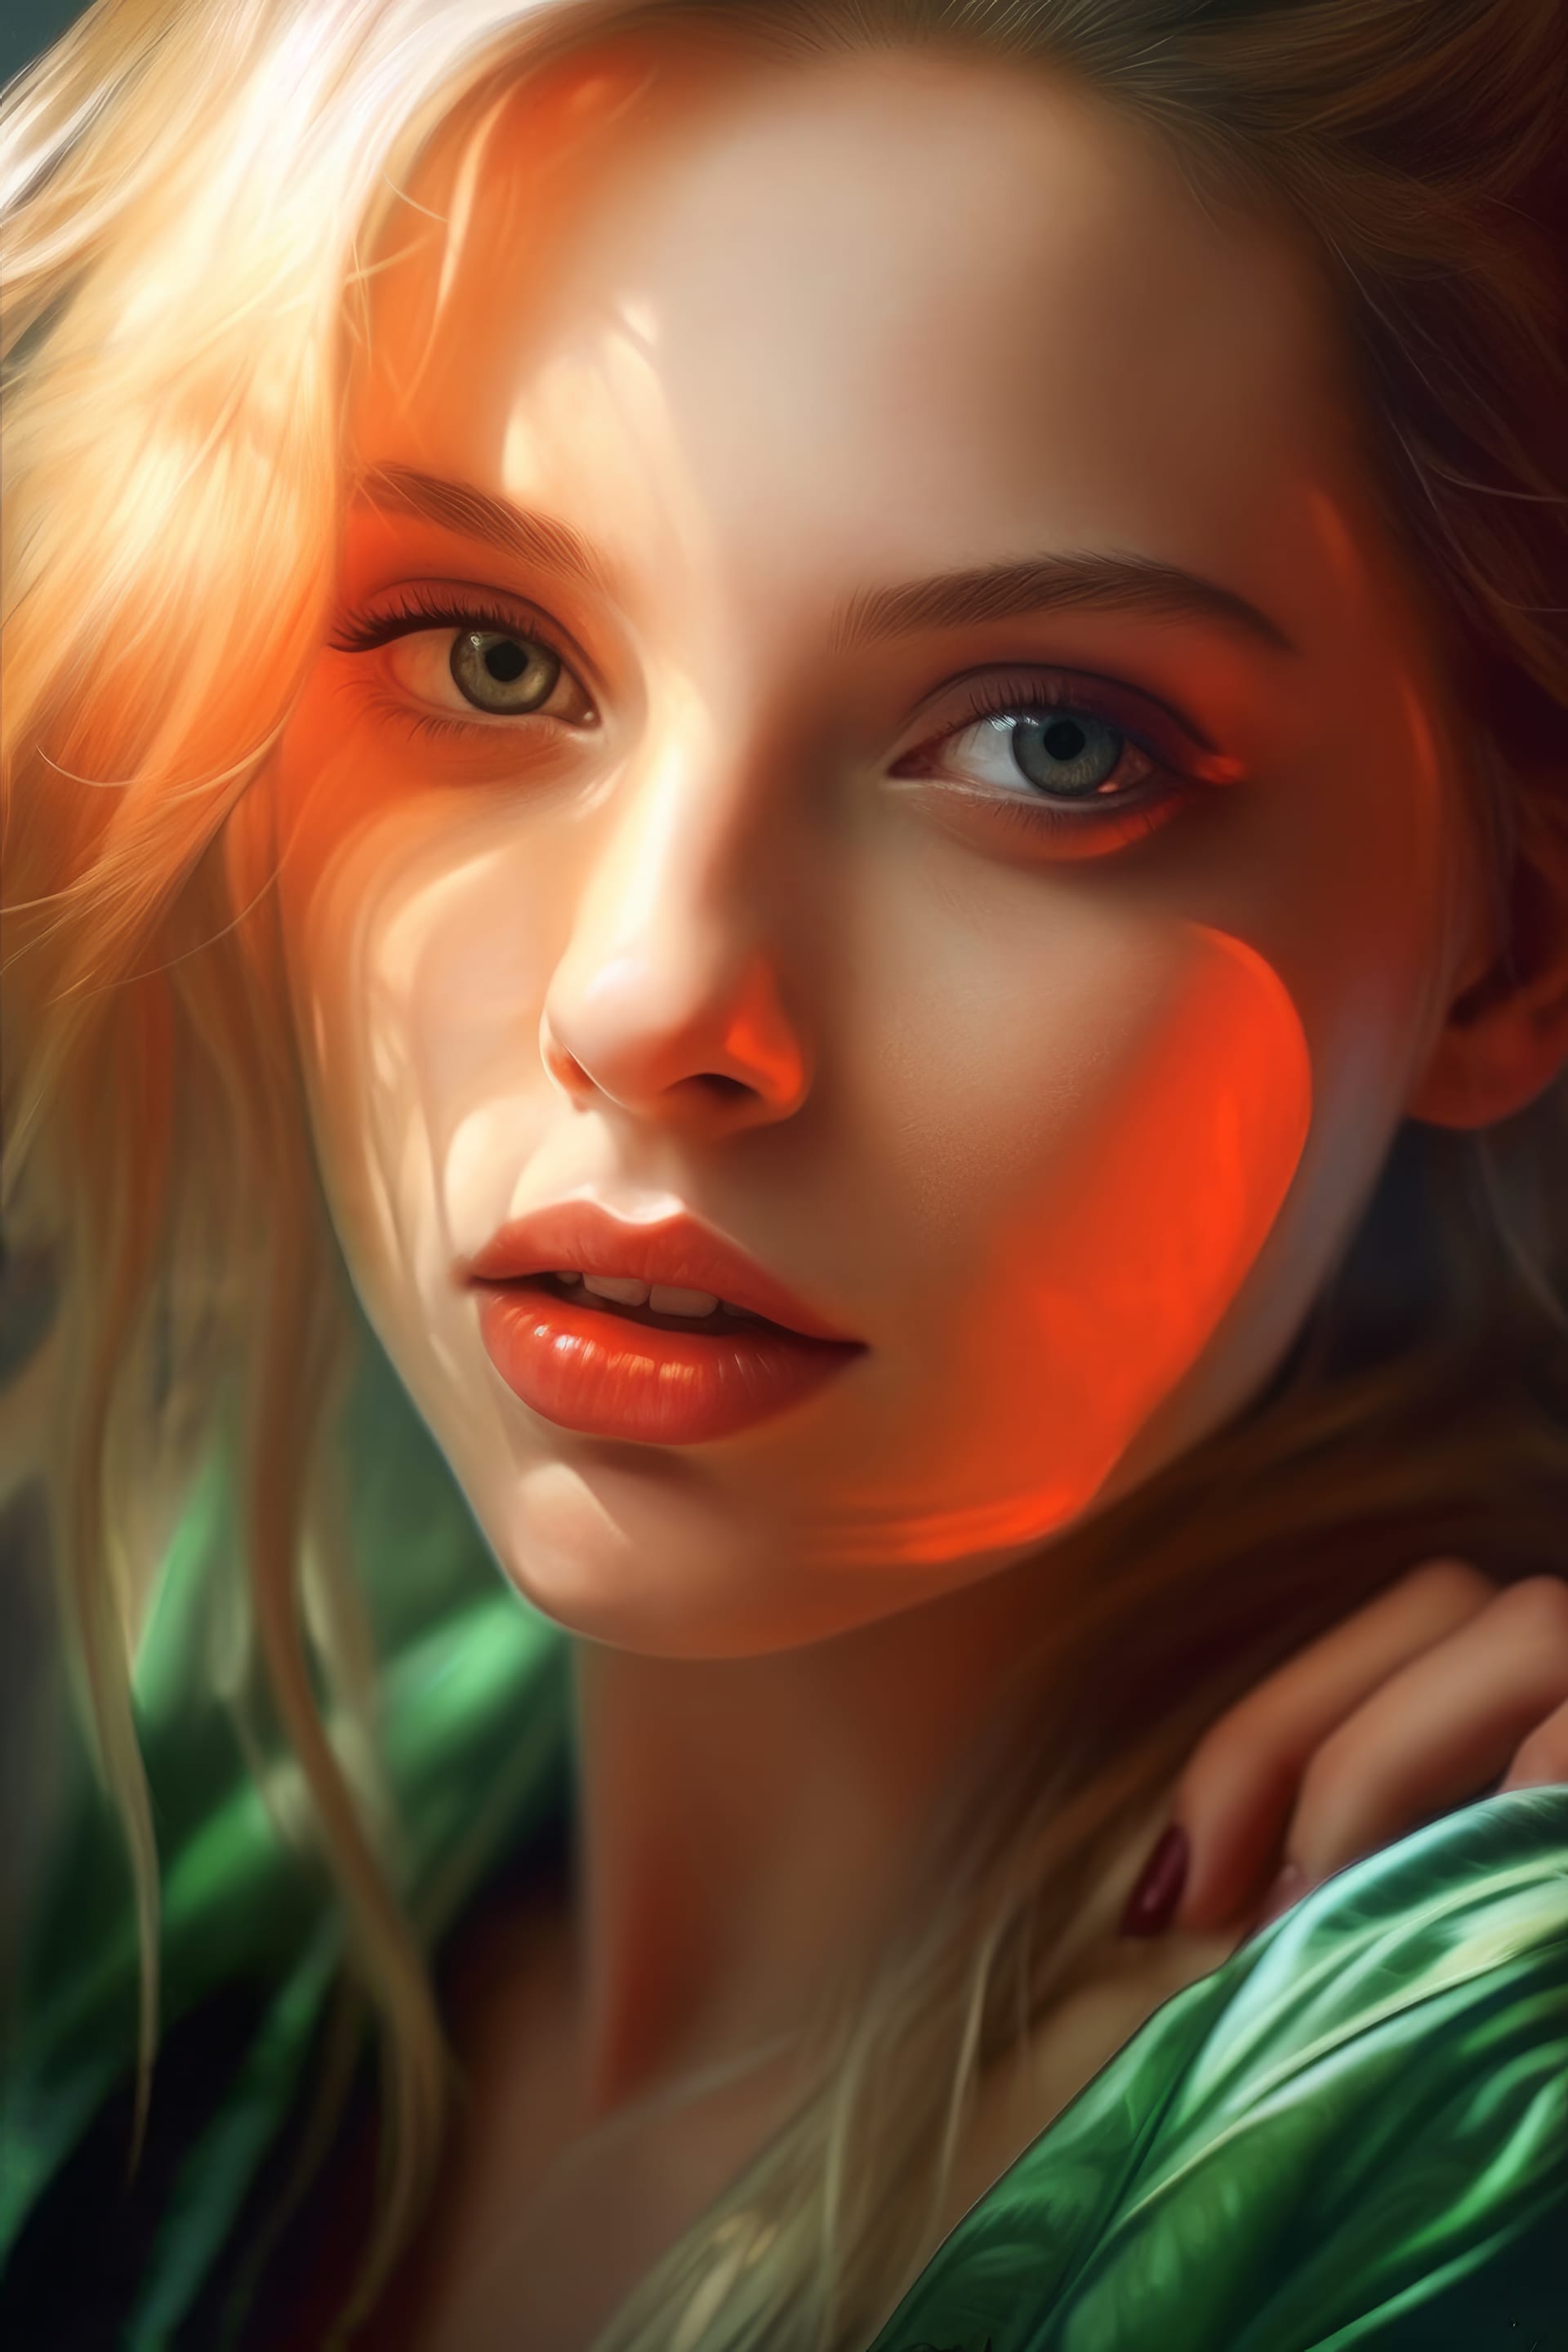 Painting young woman with green eyes